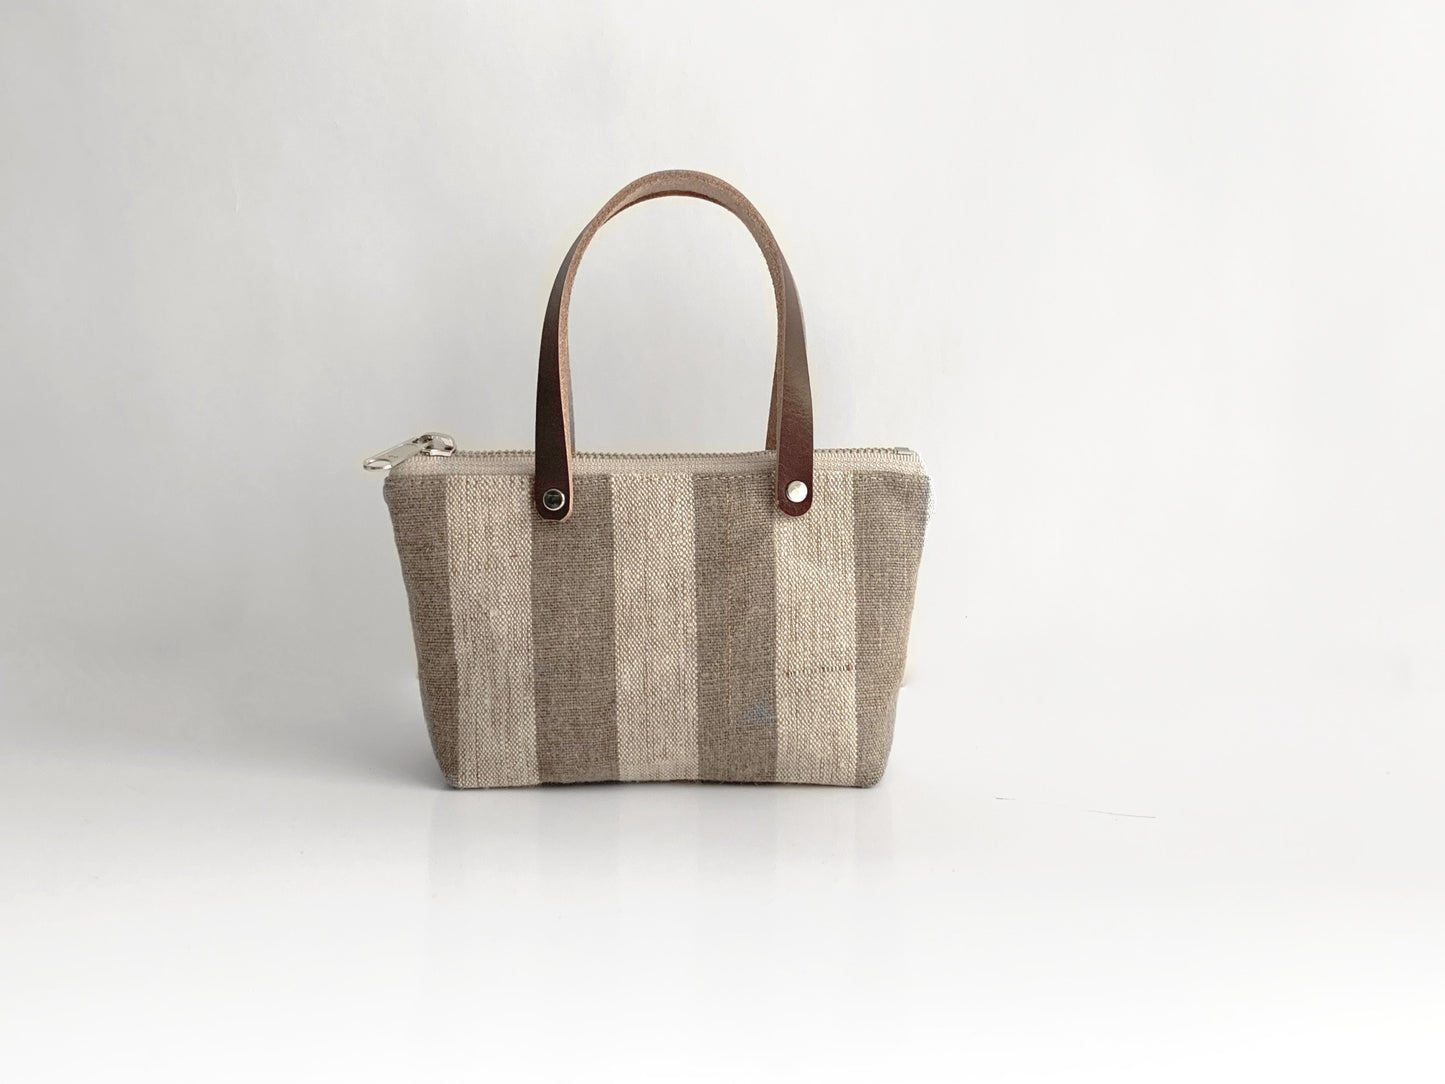 Micro Tote Bag in Striped Linen by Independent Reign